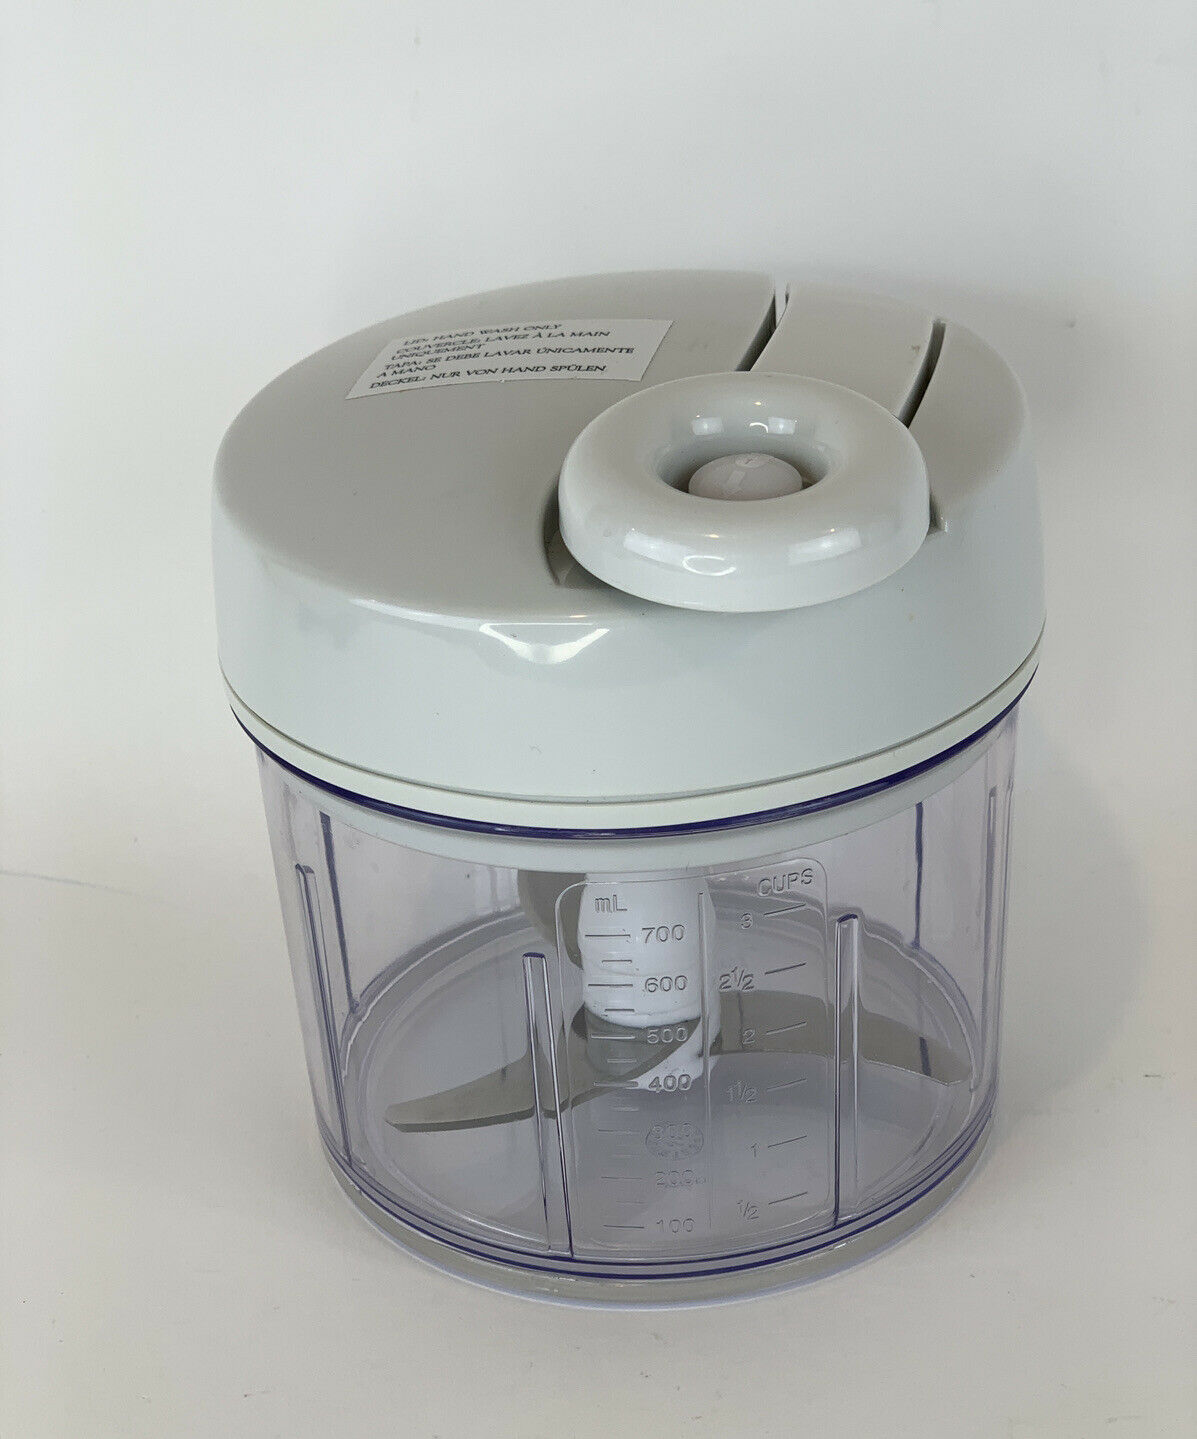 Pampered Chef Manual Food Processor Chopper 3 Cup Container Pump Handle Preowned